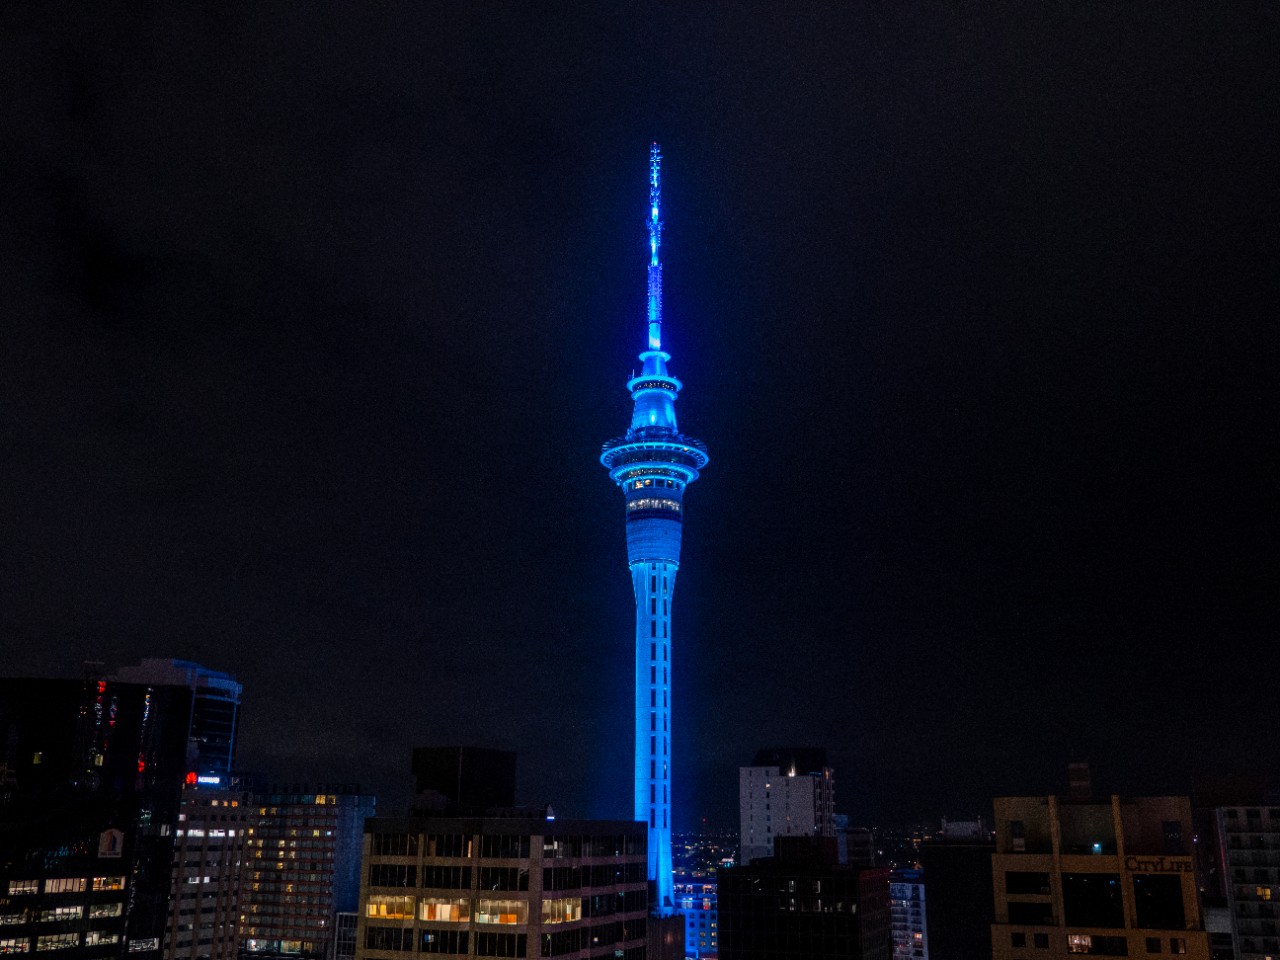 Why was the sky tower lit up blue last night? 'Aquaman' star Temuera Morrison has the answer